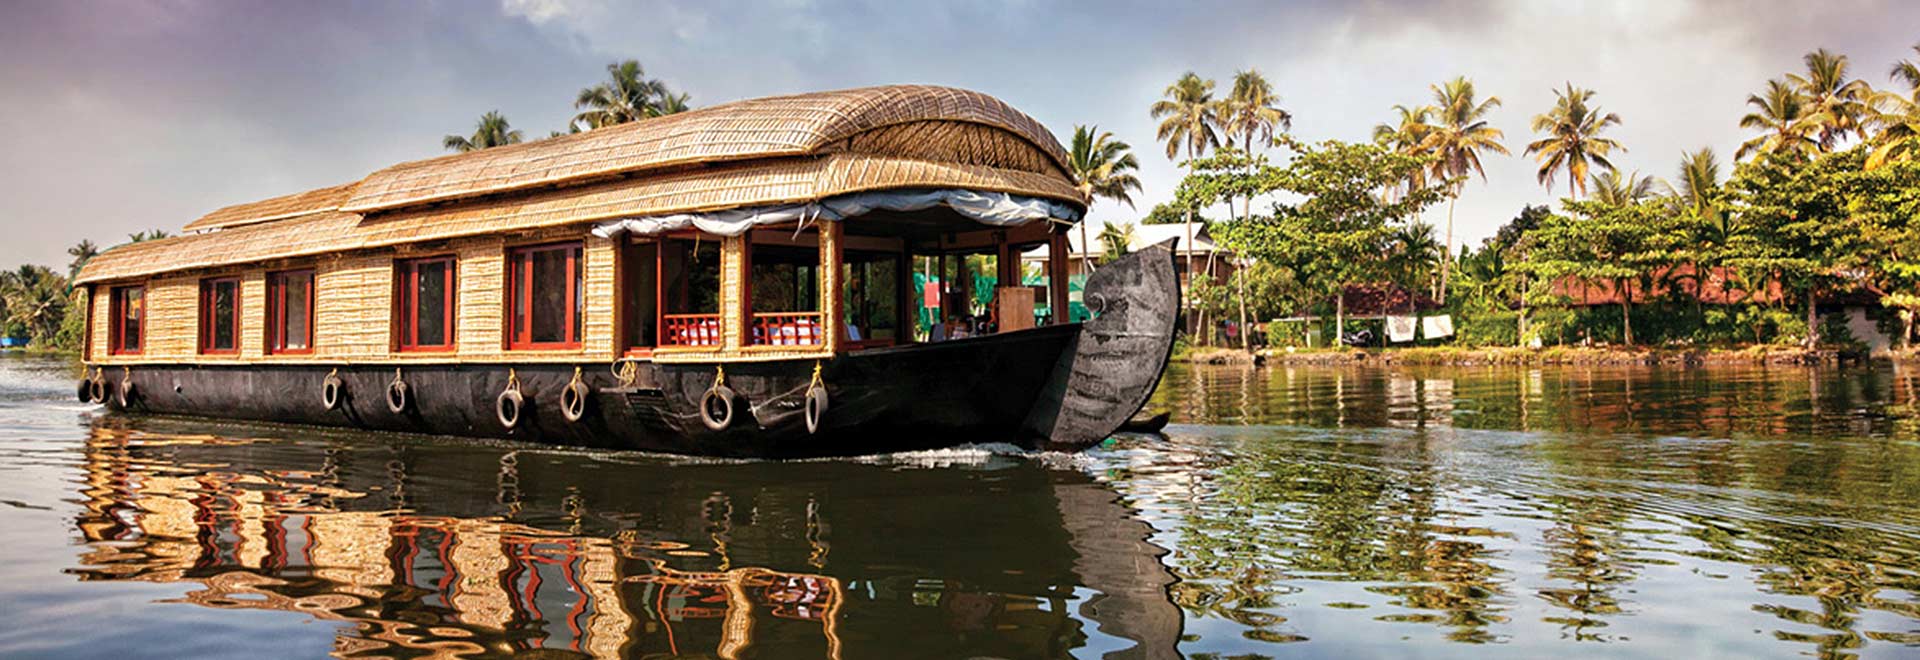 Asia Limited Edition India Beautiful South House Boat Canal MH